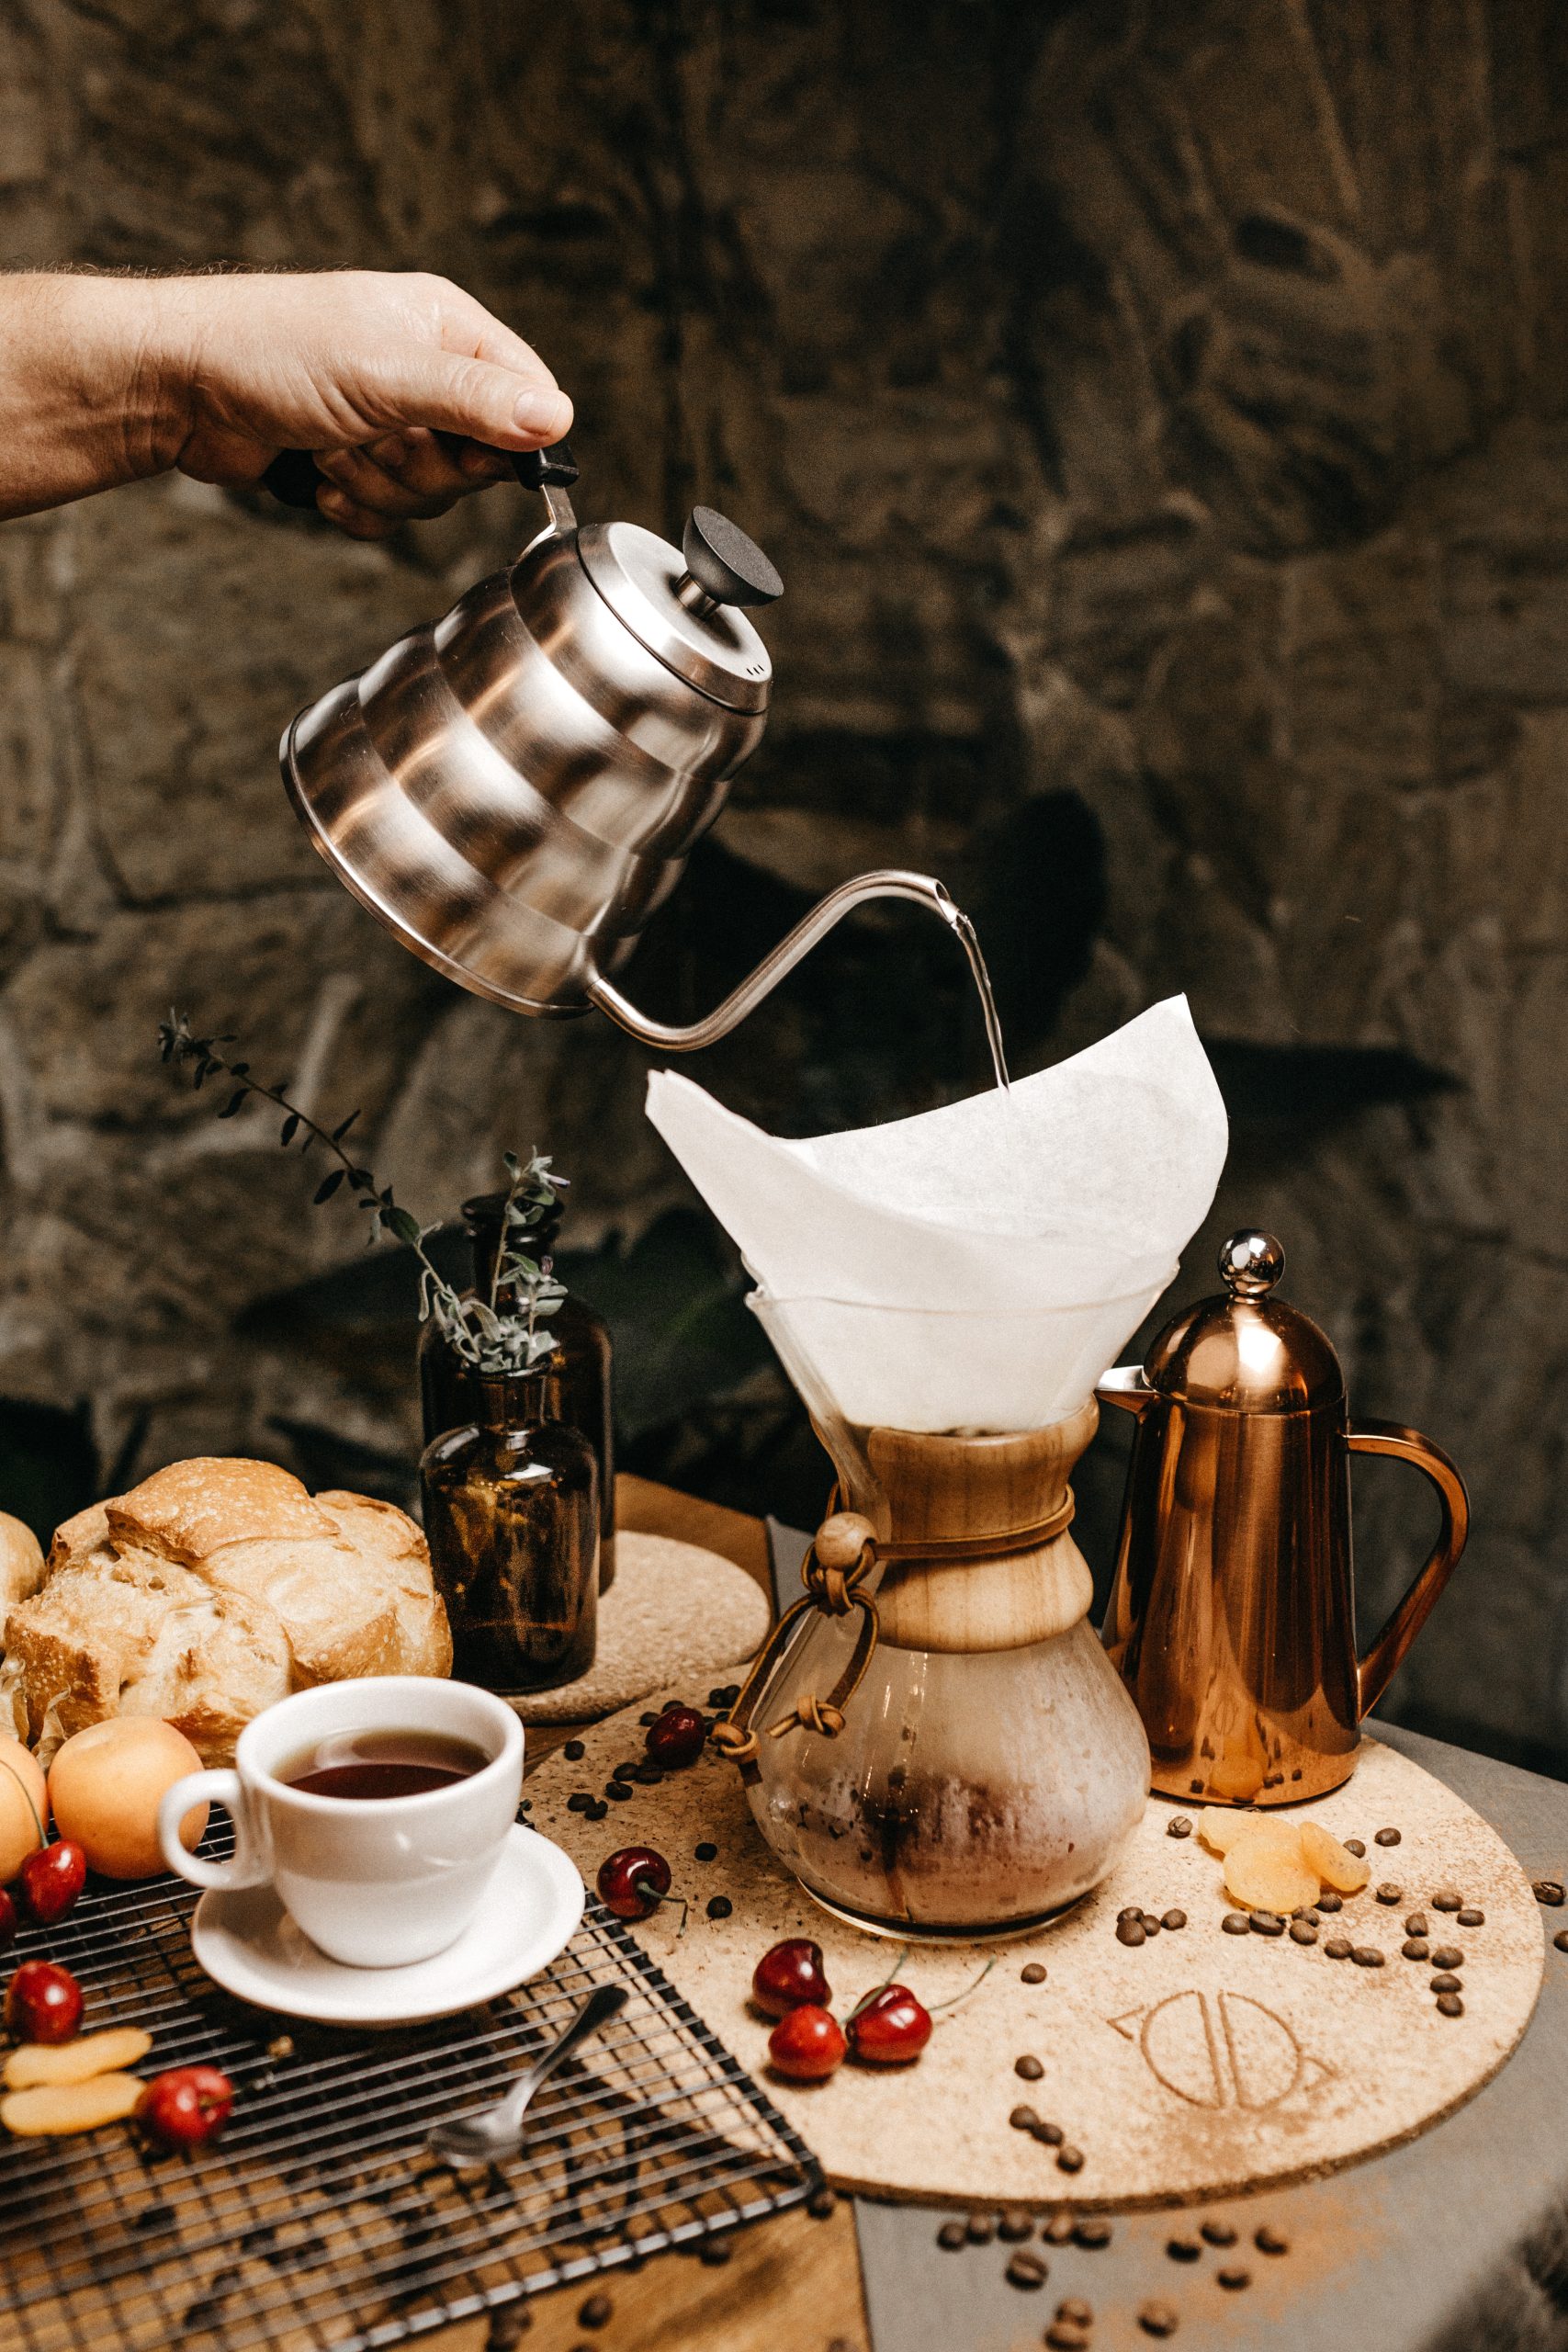 6 Reasons You Need A Gooseneck Kettle For Pour Over Coffee – Rogue Wave  Coffee